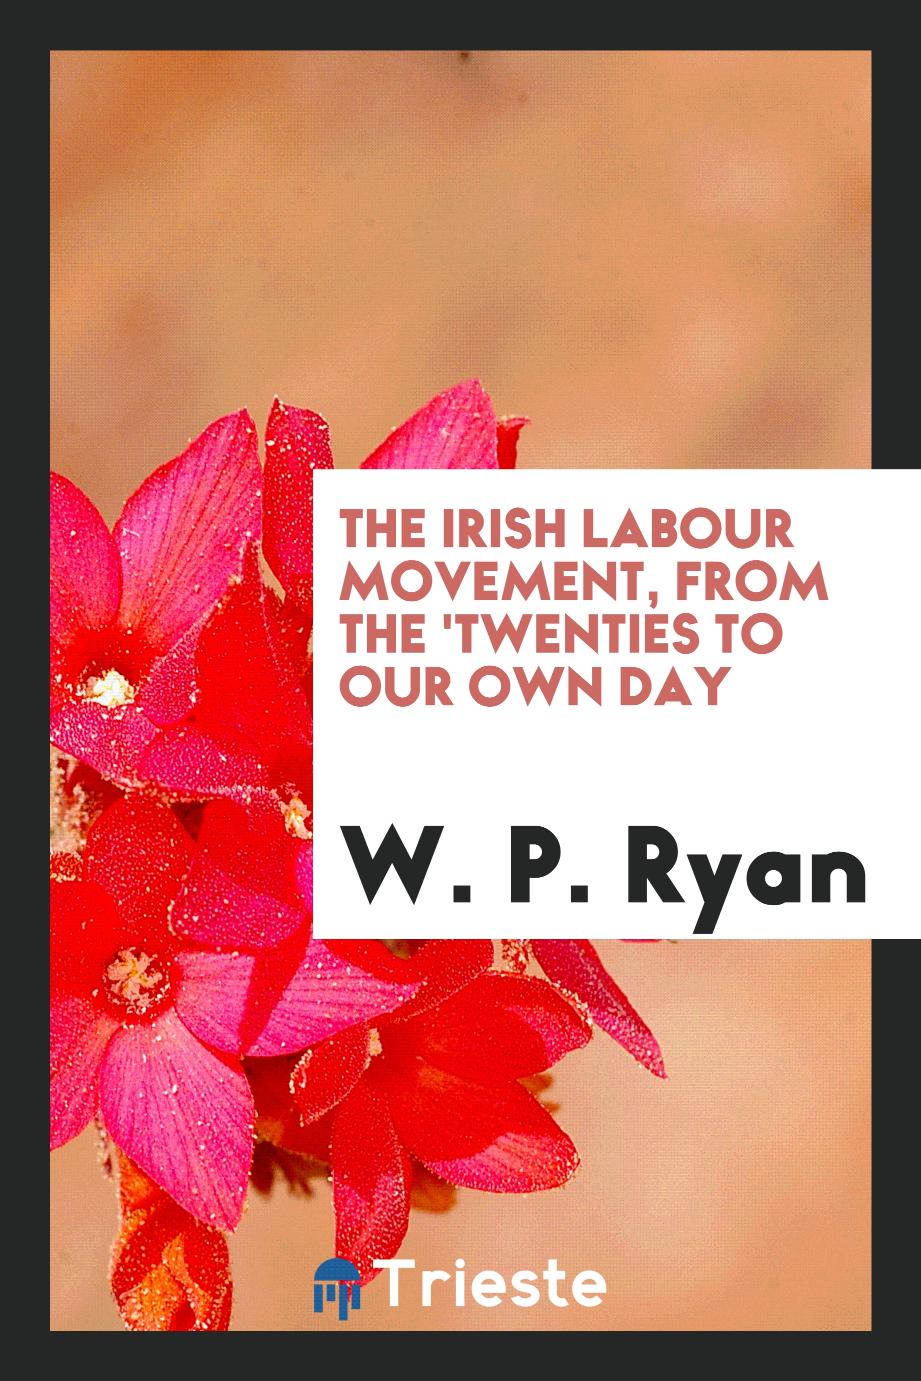 The Irish labour movement, from the 'twenties to our own day